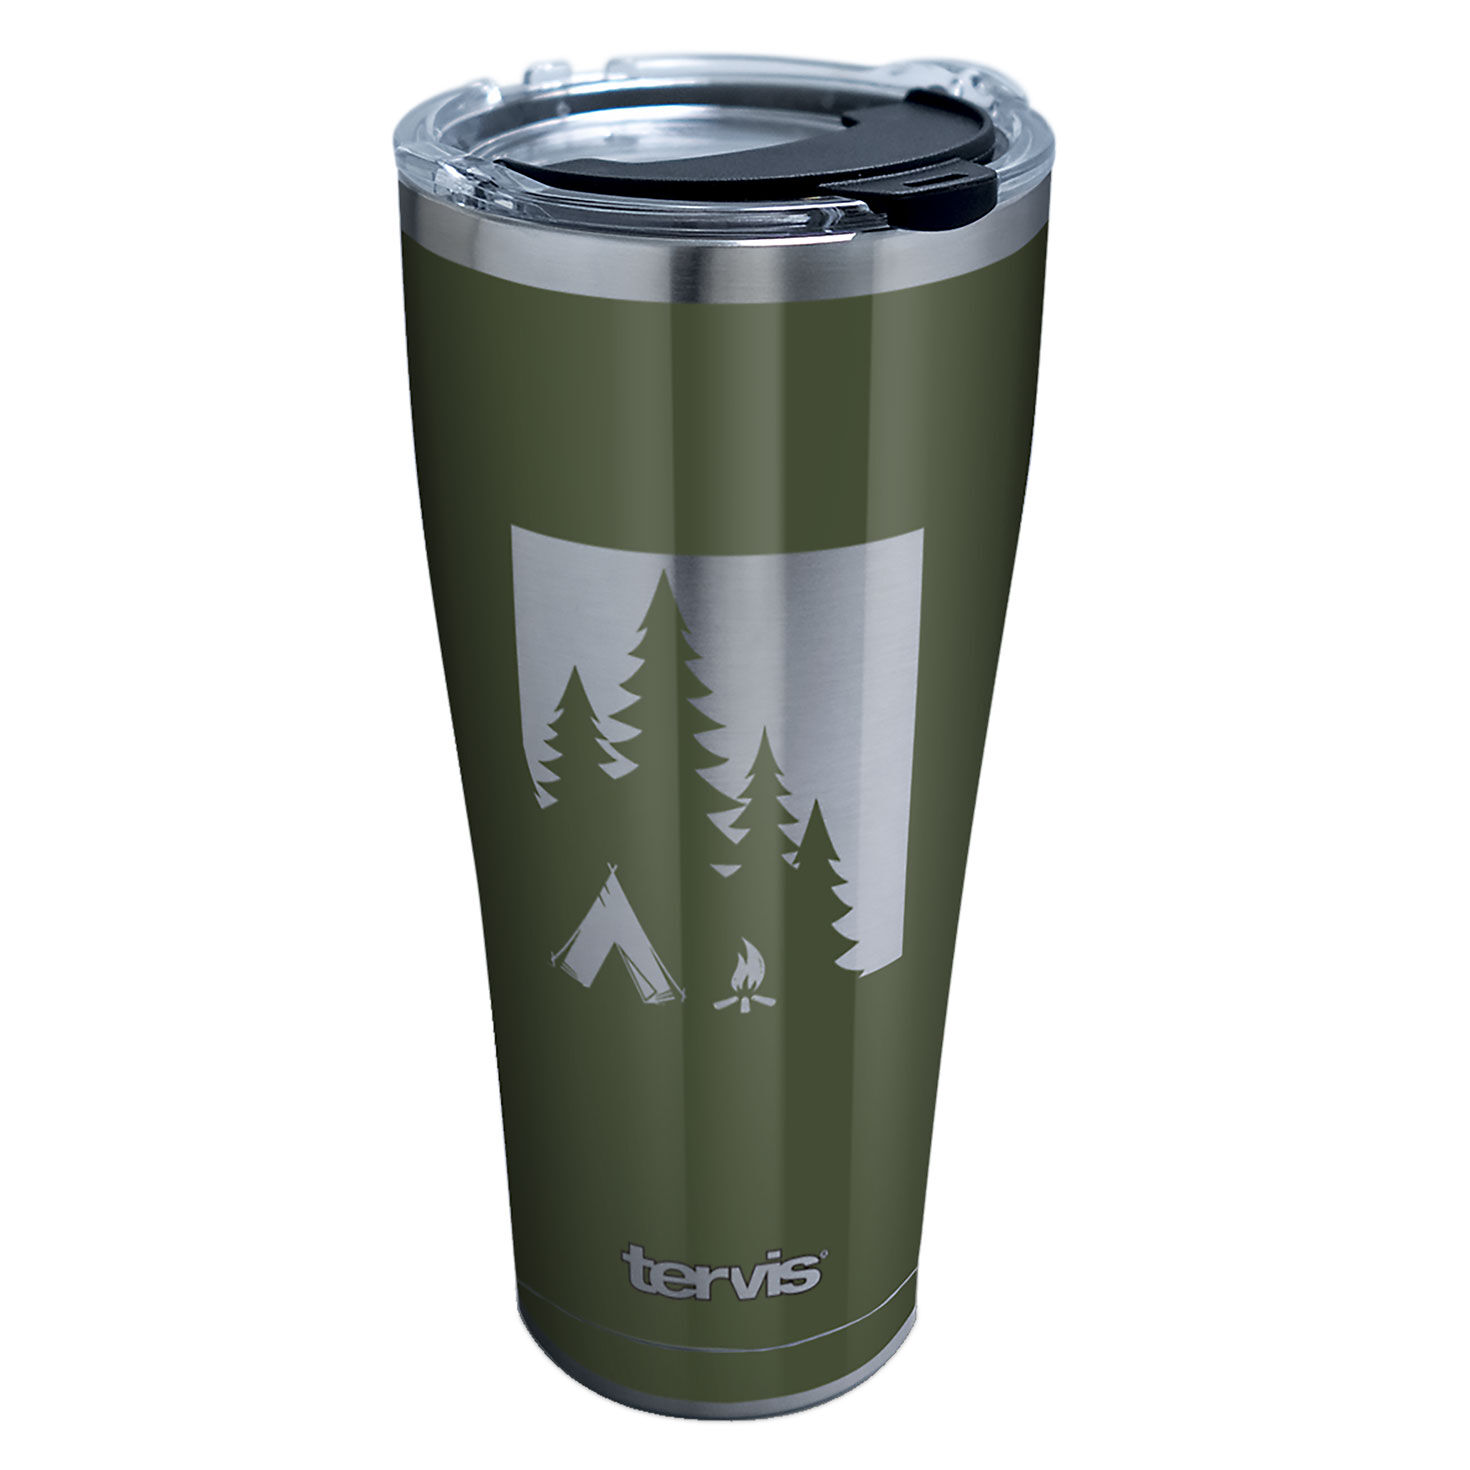 https://www.hallmark.com/dw/image/v2/AALB_PRD/on/demandware.static/-/Sites-hallmark-master/default/dw670f37fd/images/finished-goods/products/1355325/Tervis-Campsite-Insulated-Stainless-Steel-Cup_1355325_01.jpg?sfrm=jpg